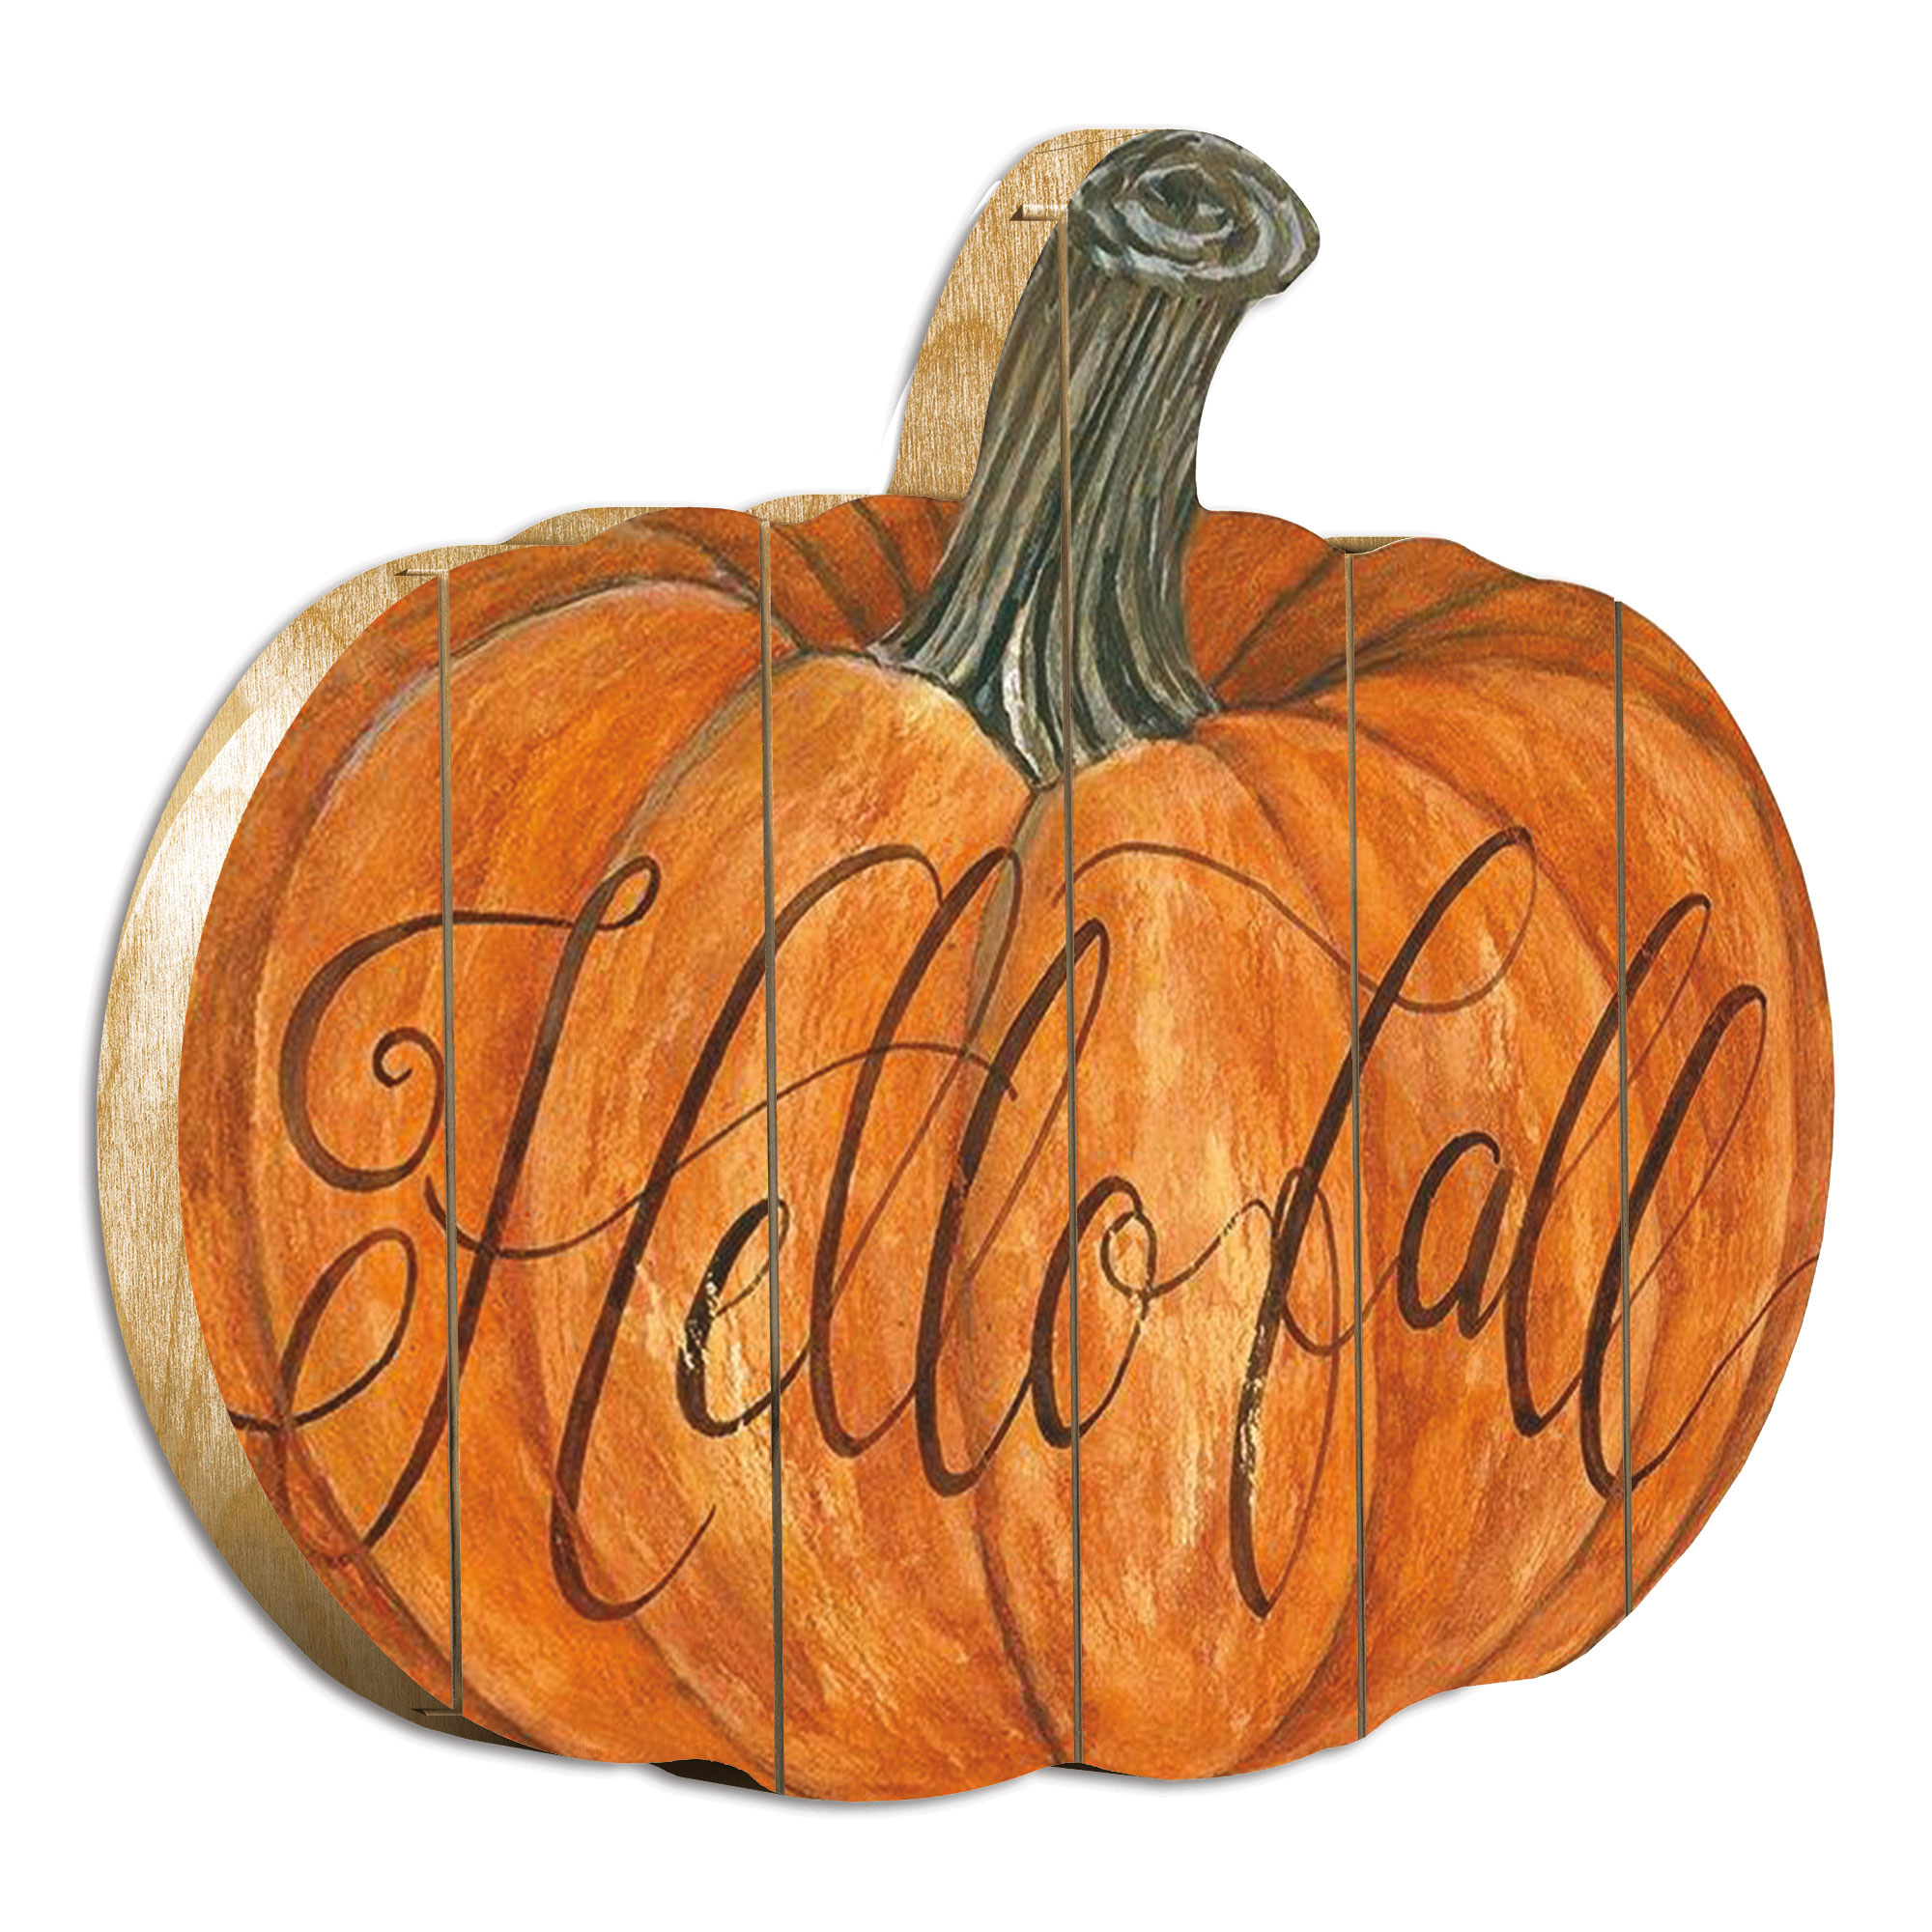 "Hello Fall" By Artisan Cindy Jacobs Printed on Wooden Pumpkin Wall Art